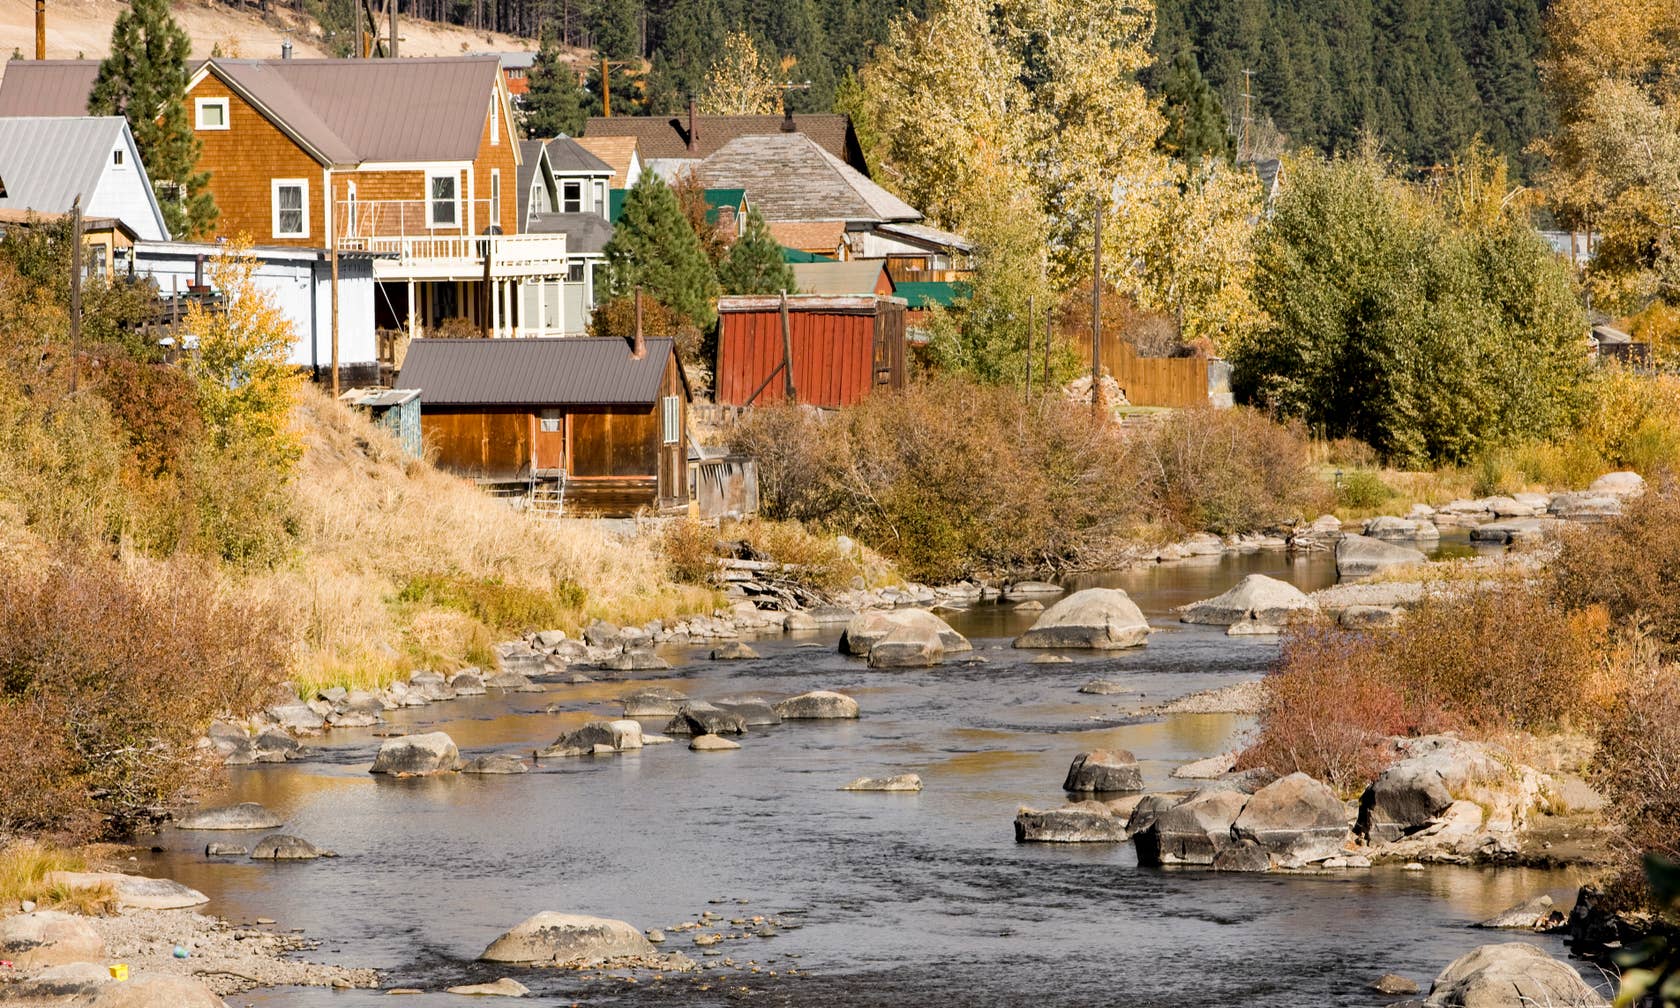 Holiday rentals in Truckee